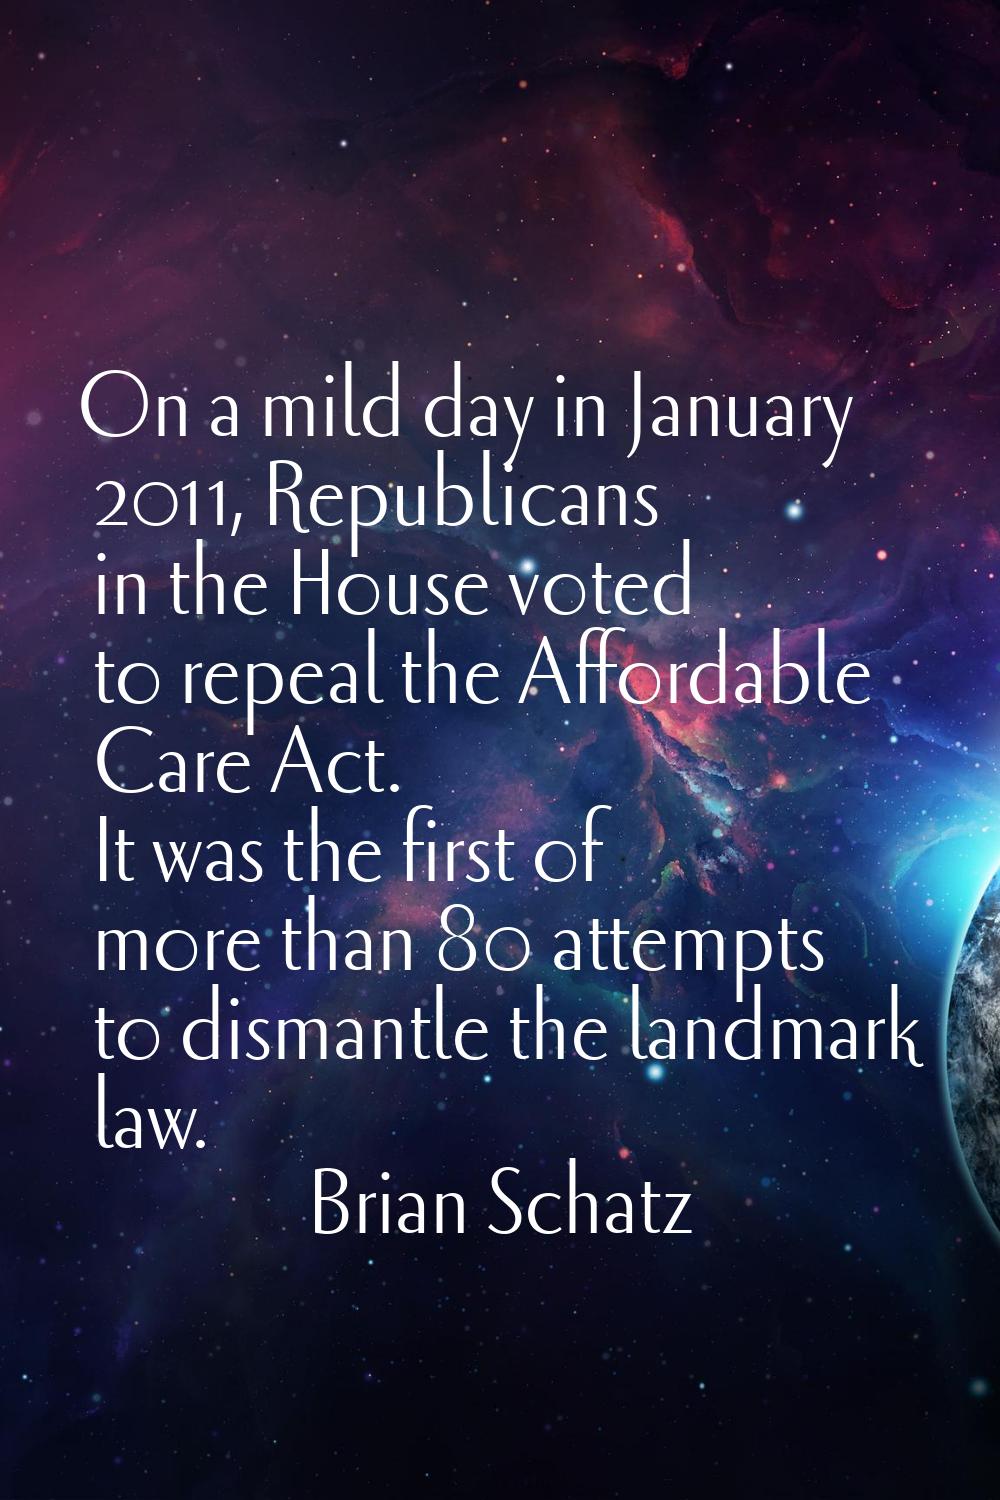 On a mild day in January 2011, Republicans in the House voted to repeal the Affordable Care Act. It